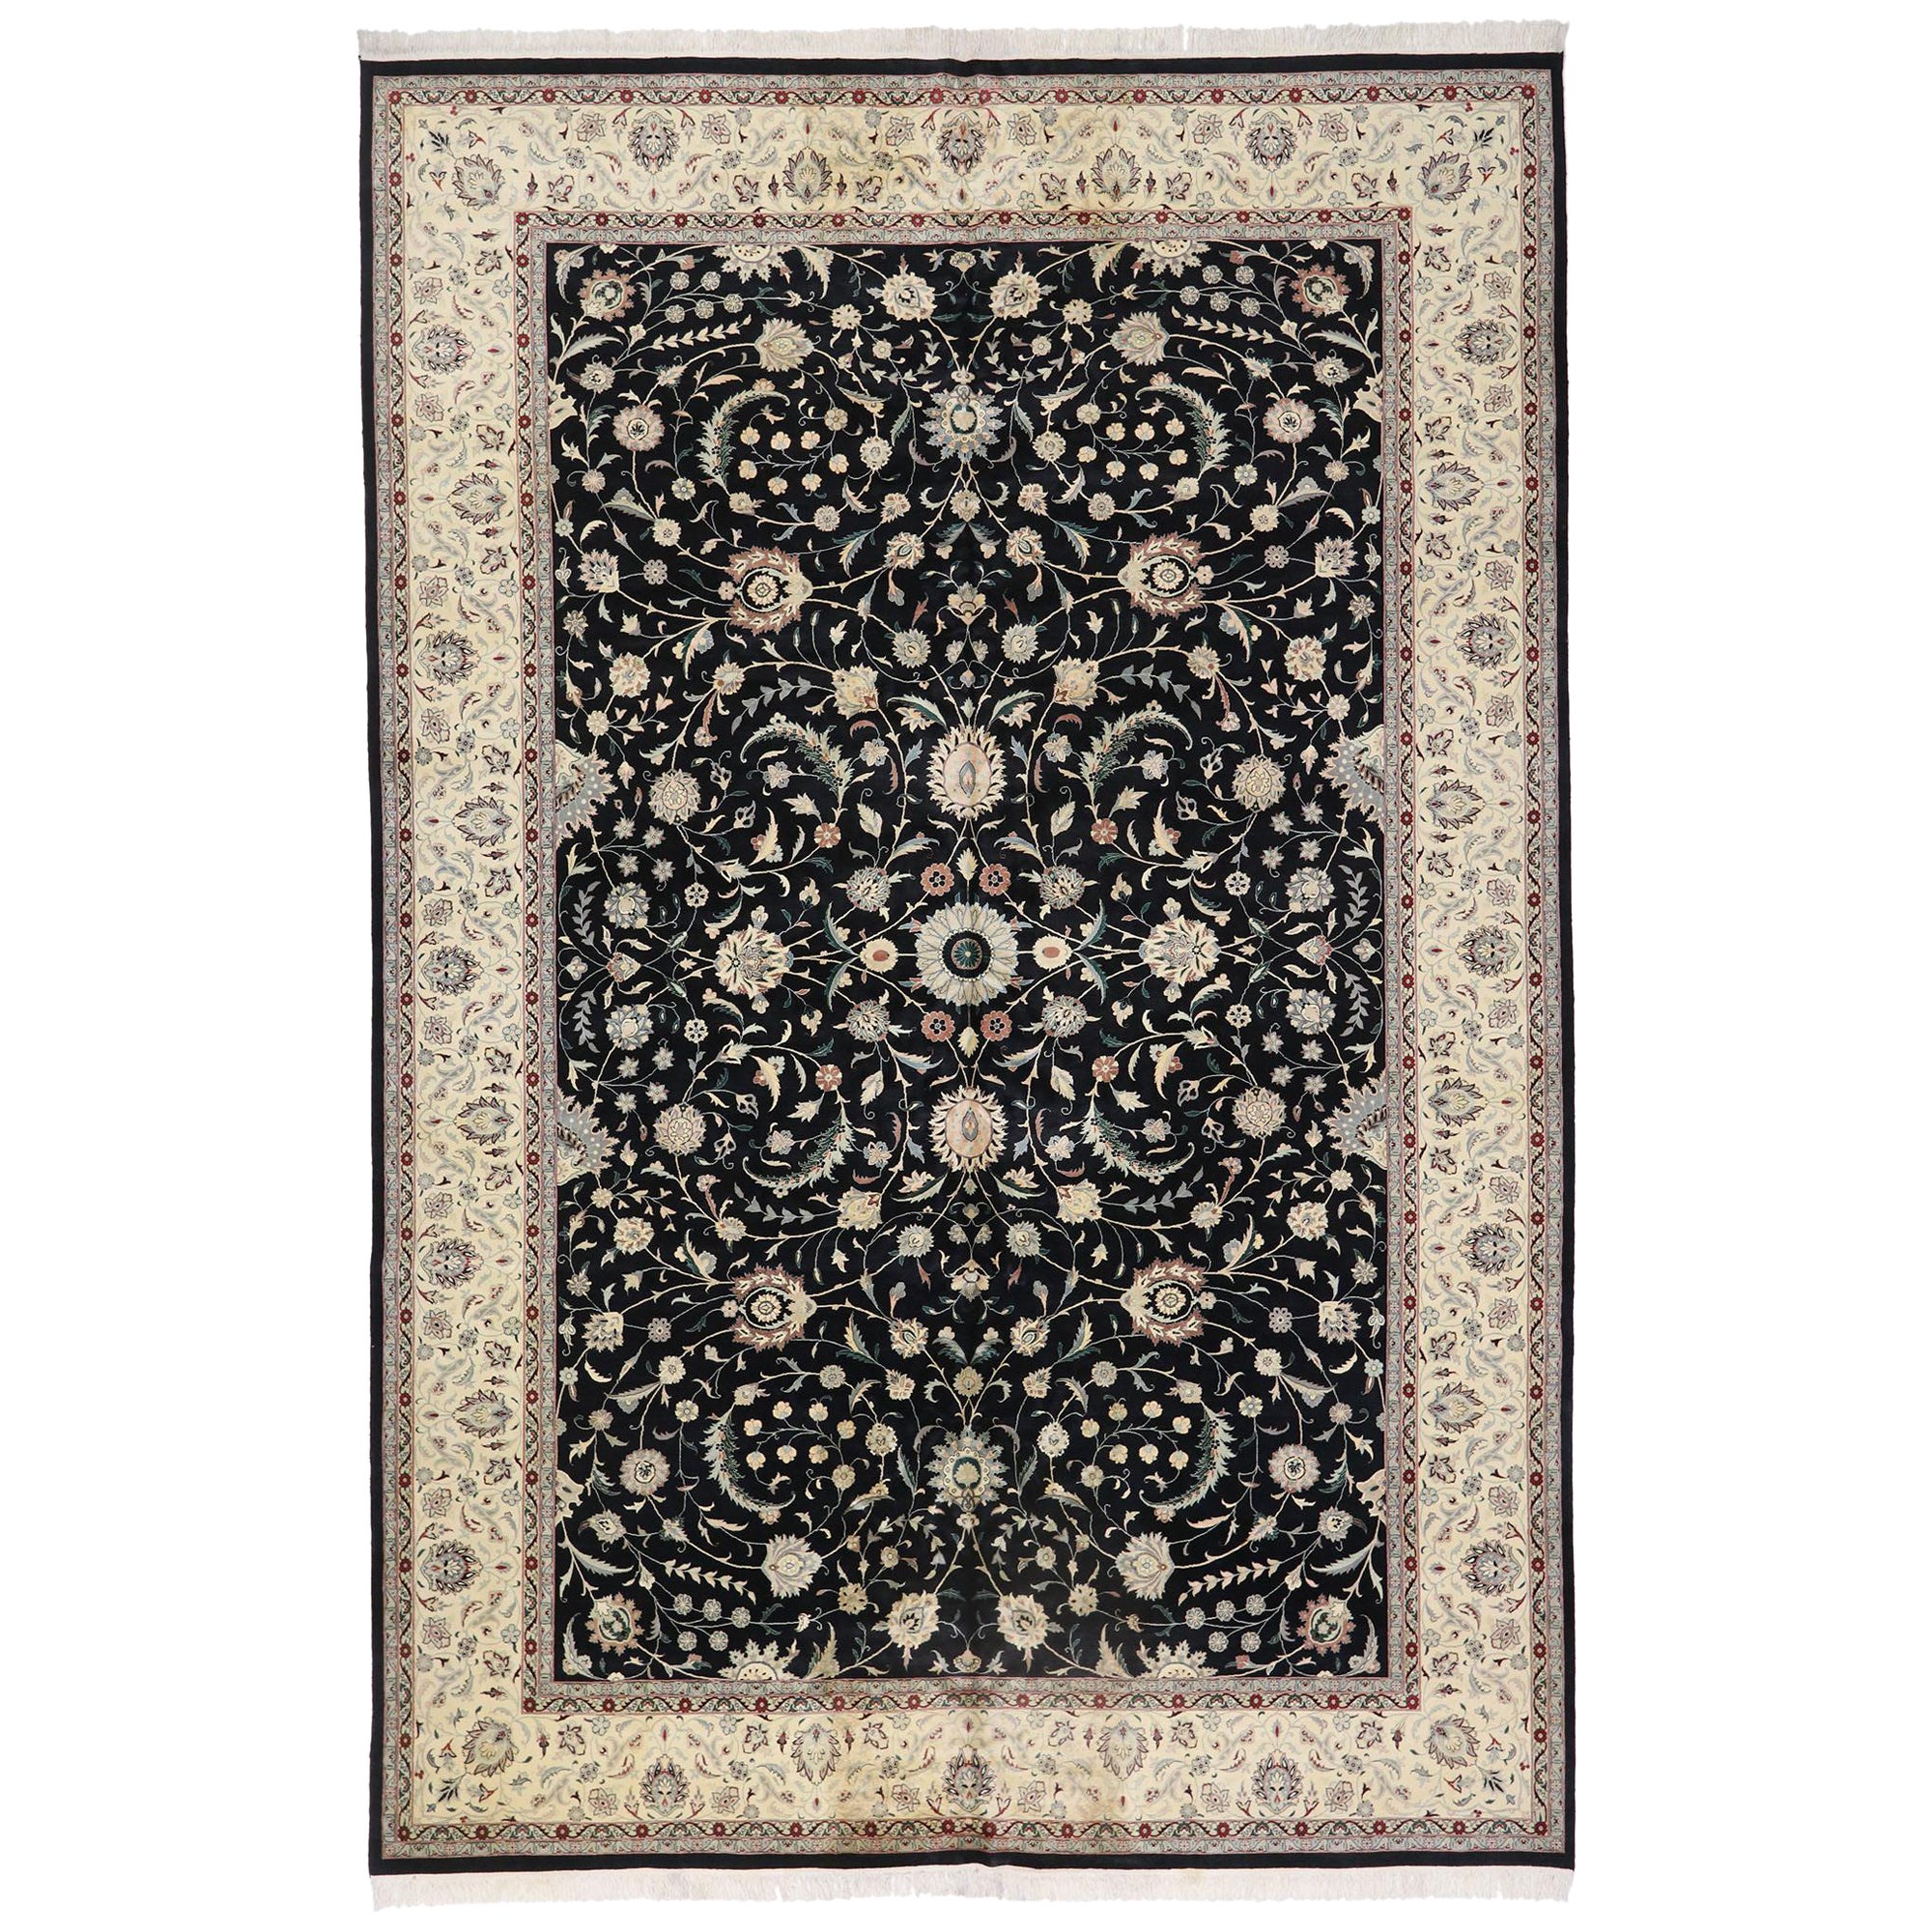 Vintage Persian Tabriz Pakistani Rug with Neoclassical Baroque Style